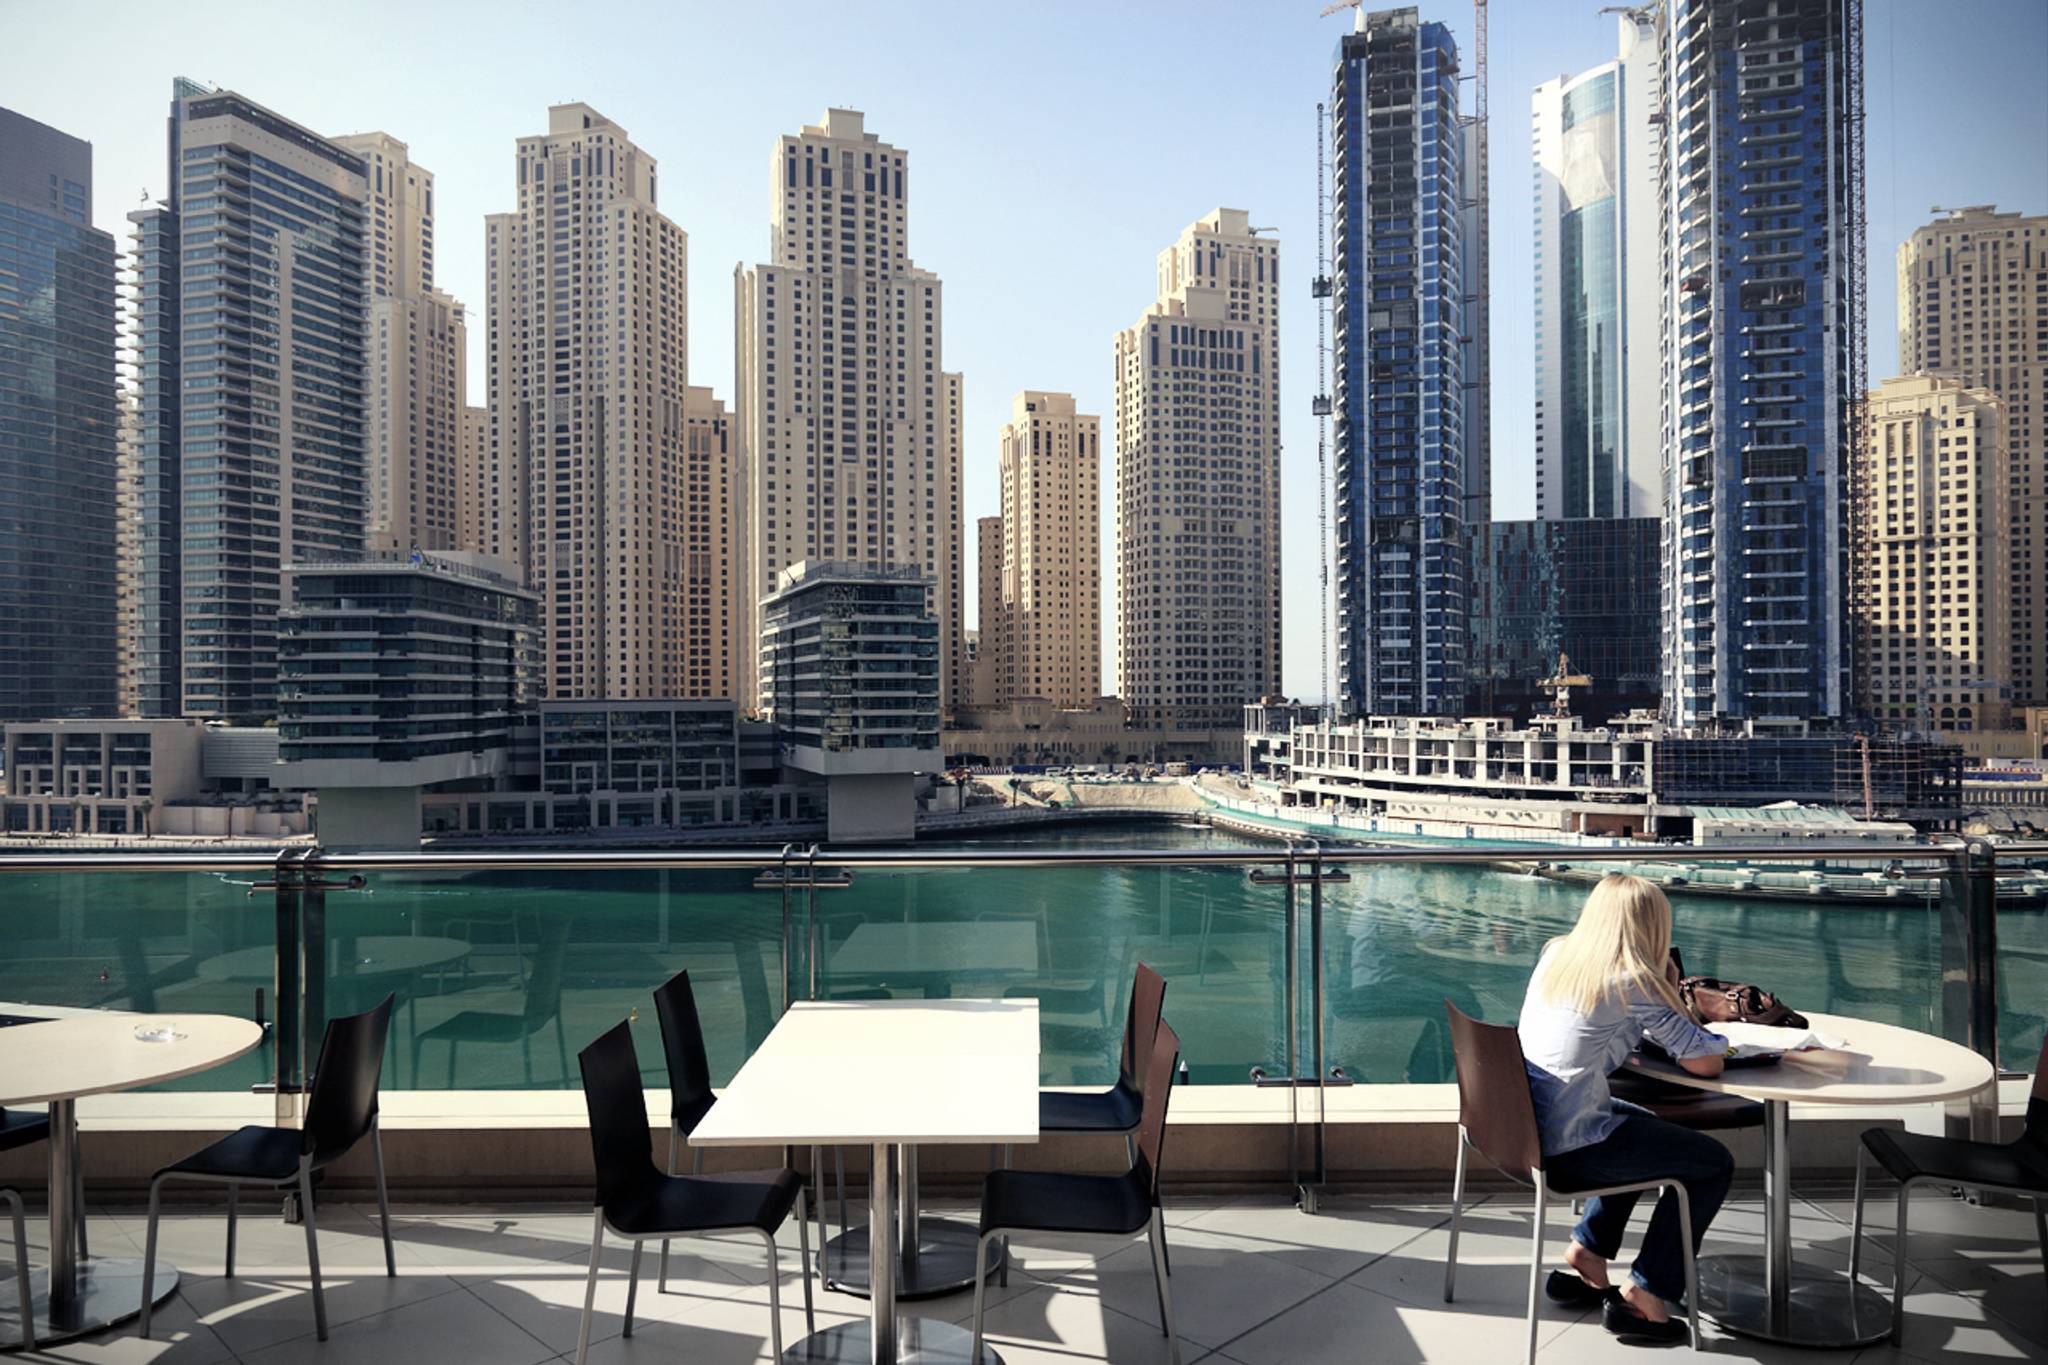 Luxury hotels expand in the Middle East